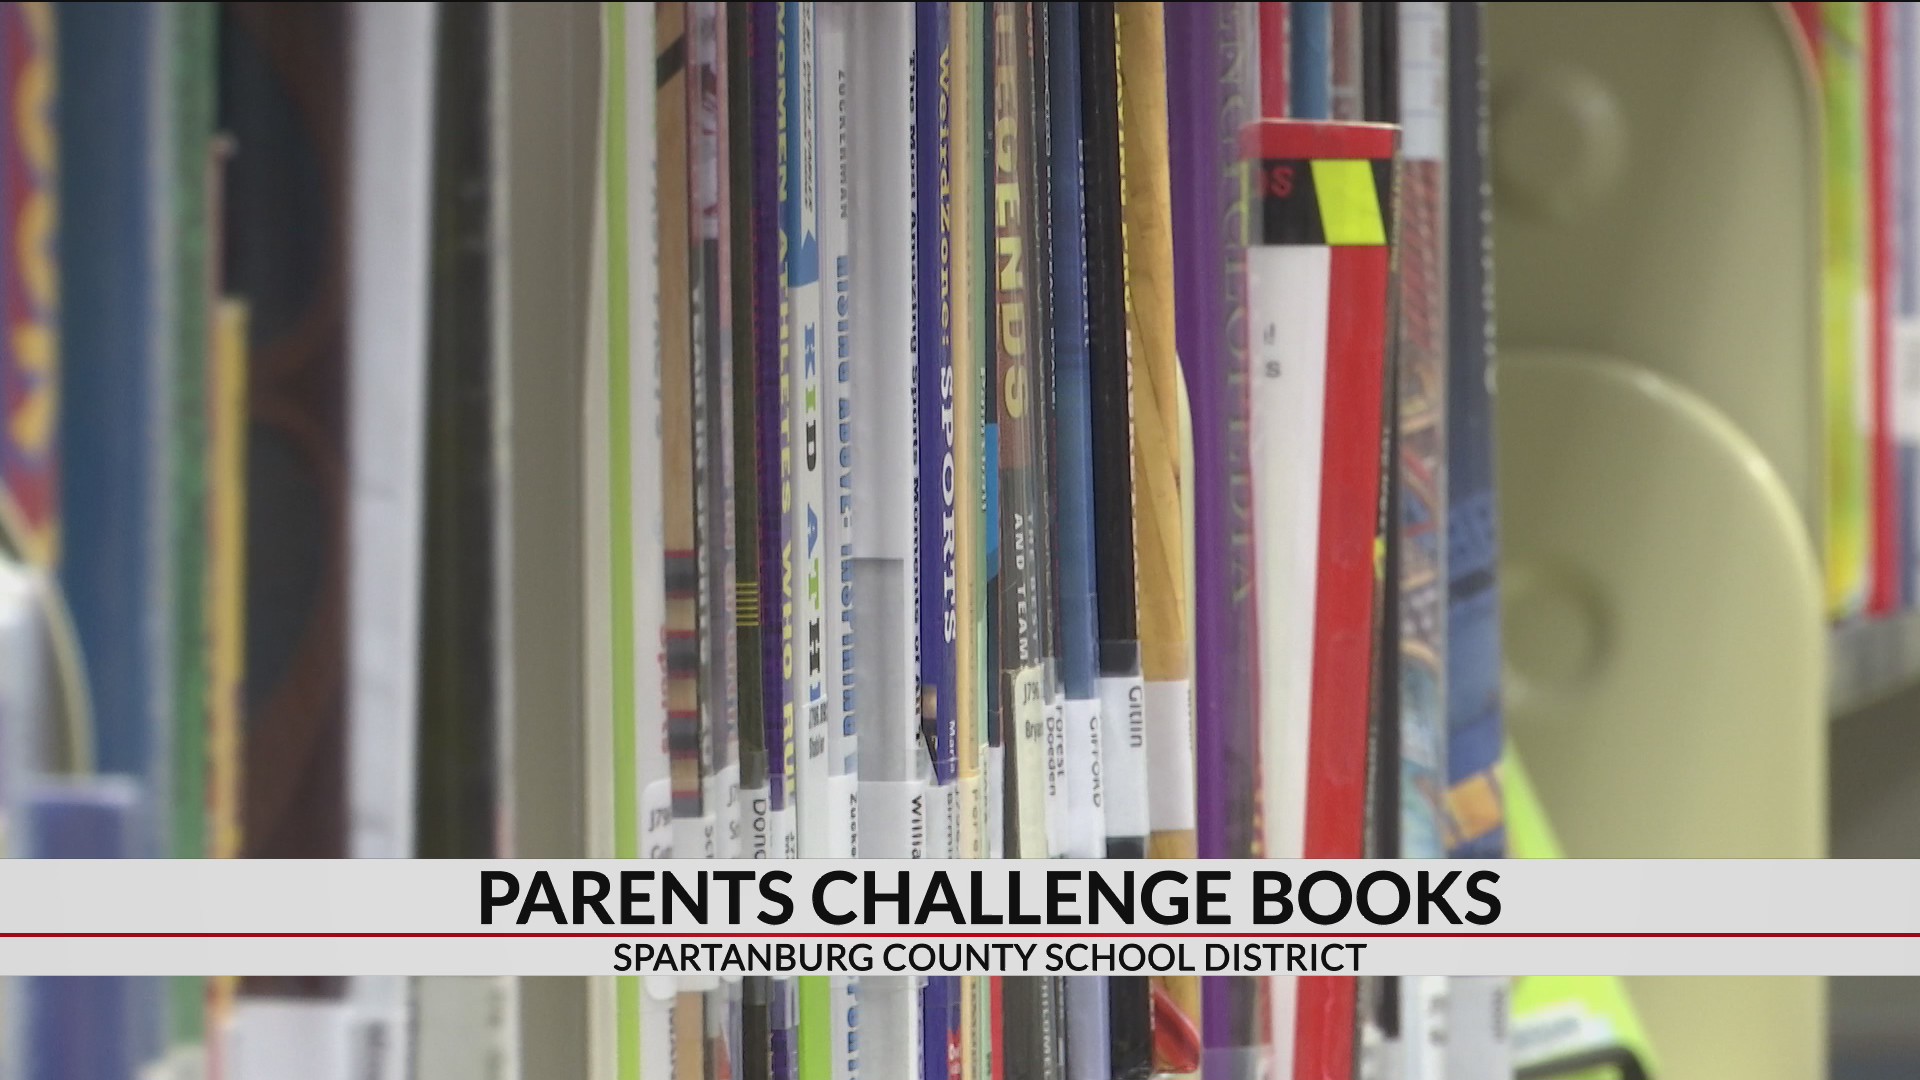 Thumbnail for the video titled "Parents challenge books assigned to Spartanburg Co. middle-schoolers"